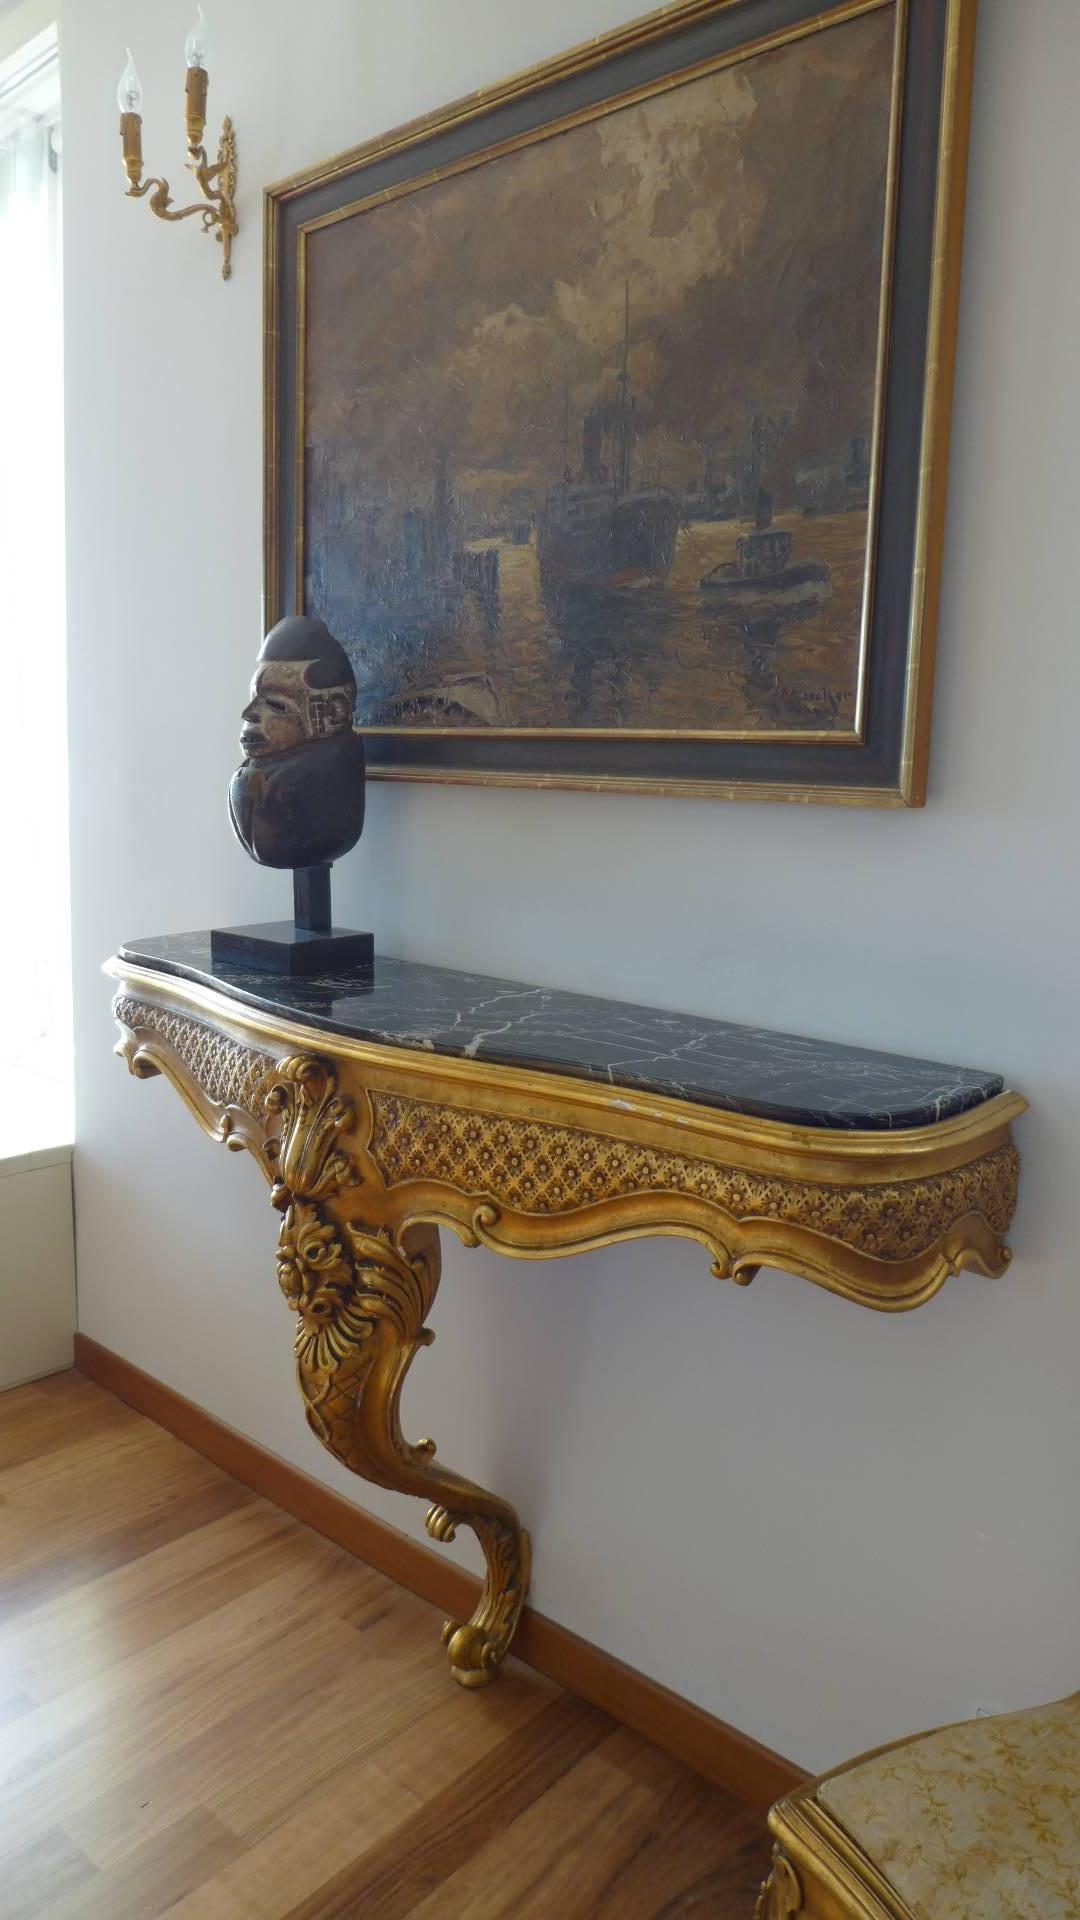 19th century giltwood black marble-top console table with very detailed carvings.
France,
circa 1860.